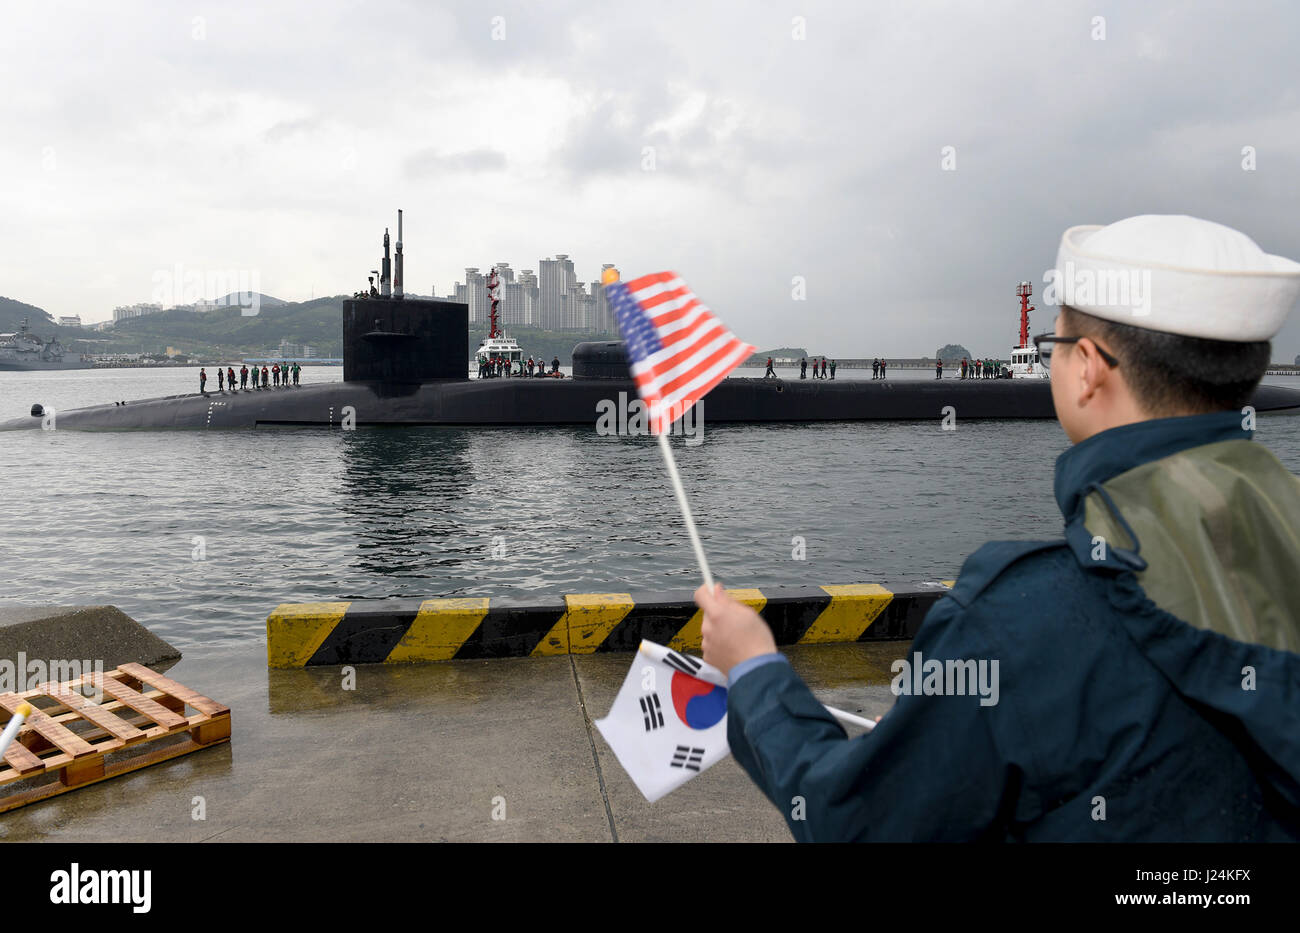 Philippine Sea. 24th Apr, 2017. The U.S. Navy Ohio-class guided-missile submarine USS Michigan comes into port for supplies April 24, 2017 in Busan, South Korea. The Michigan is armed with 150 Tomahawk missiles and is paying a port visit to South Korea as tensions continue to rise between the U.S. and North Korea. Credit: Planetpix/Alamy Live News Stock Photo